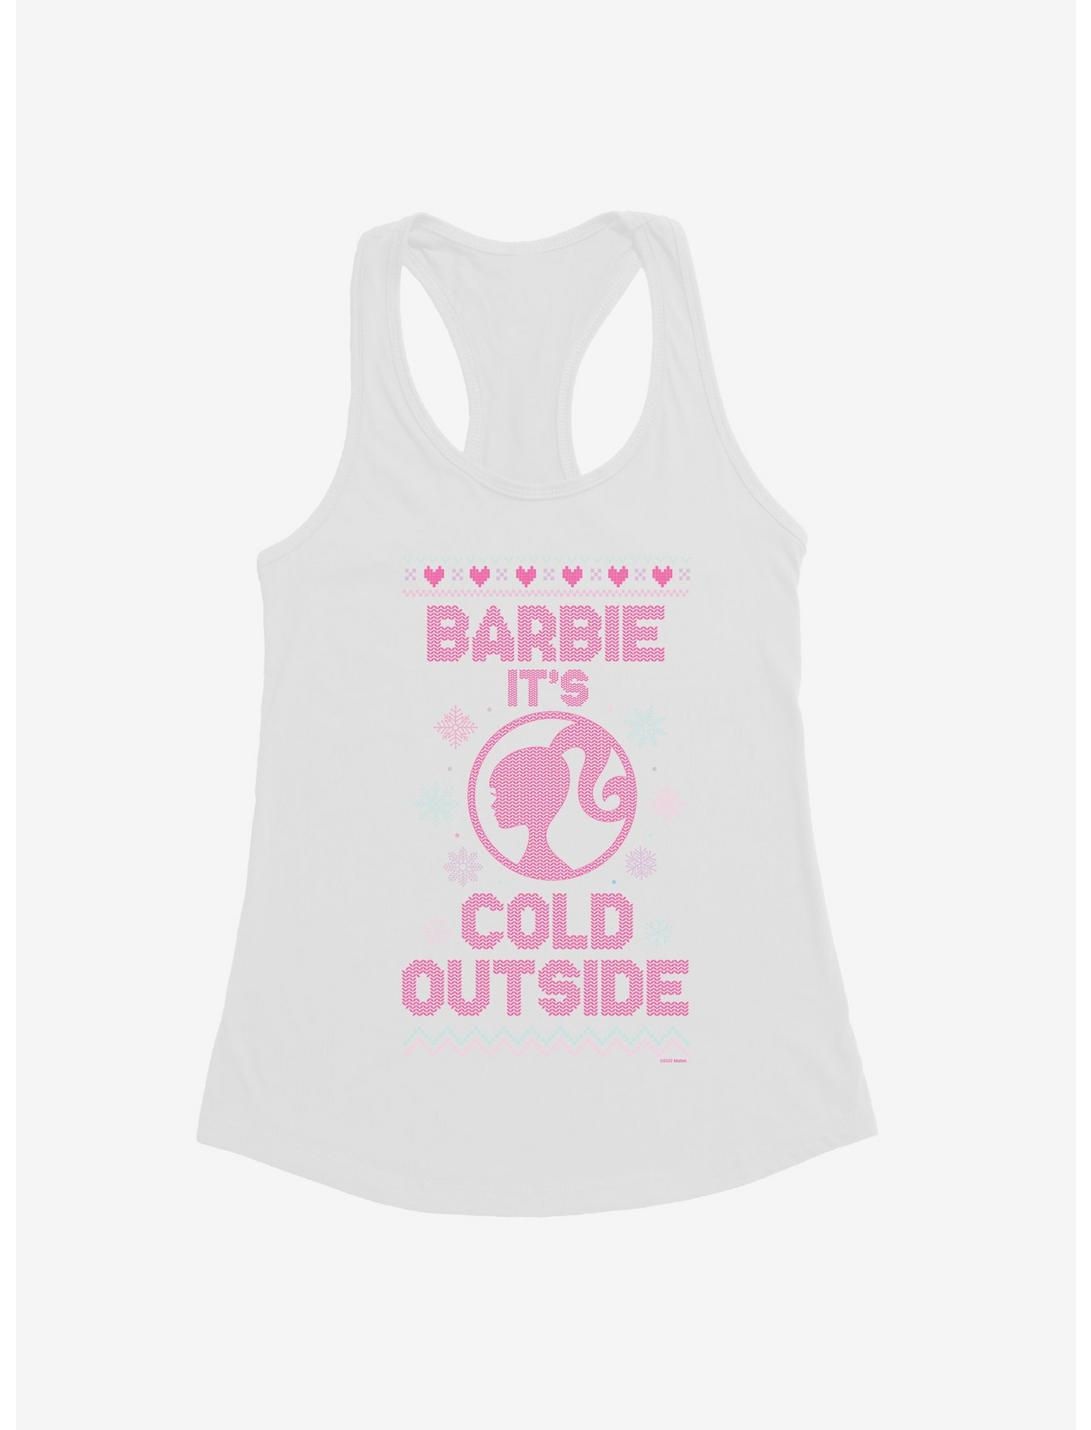 Barbie It's Cold Outside Ugly Christmas Pattern Girls Tank, , hi-res